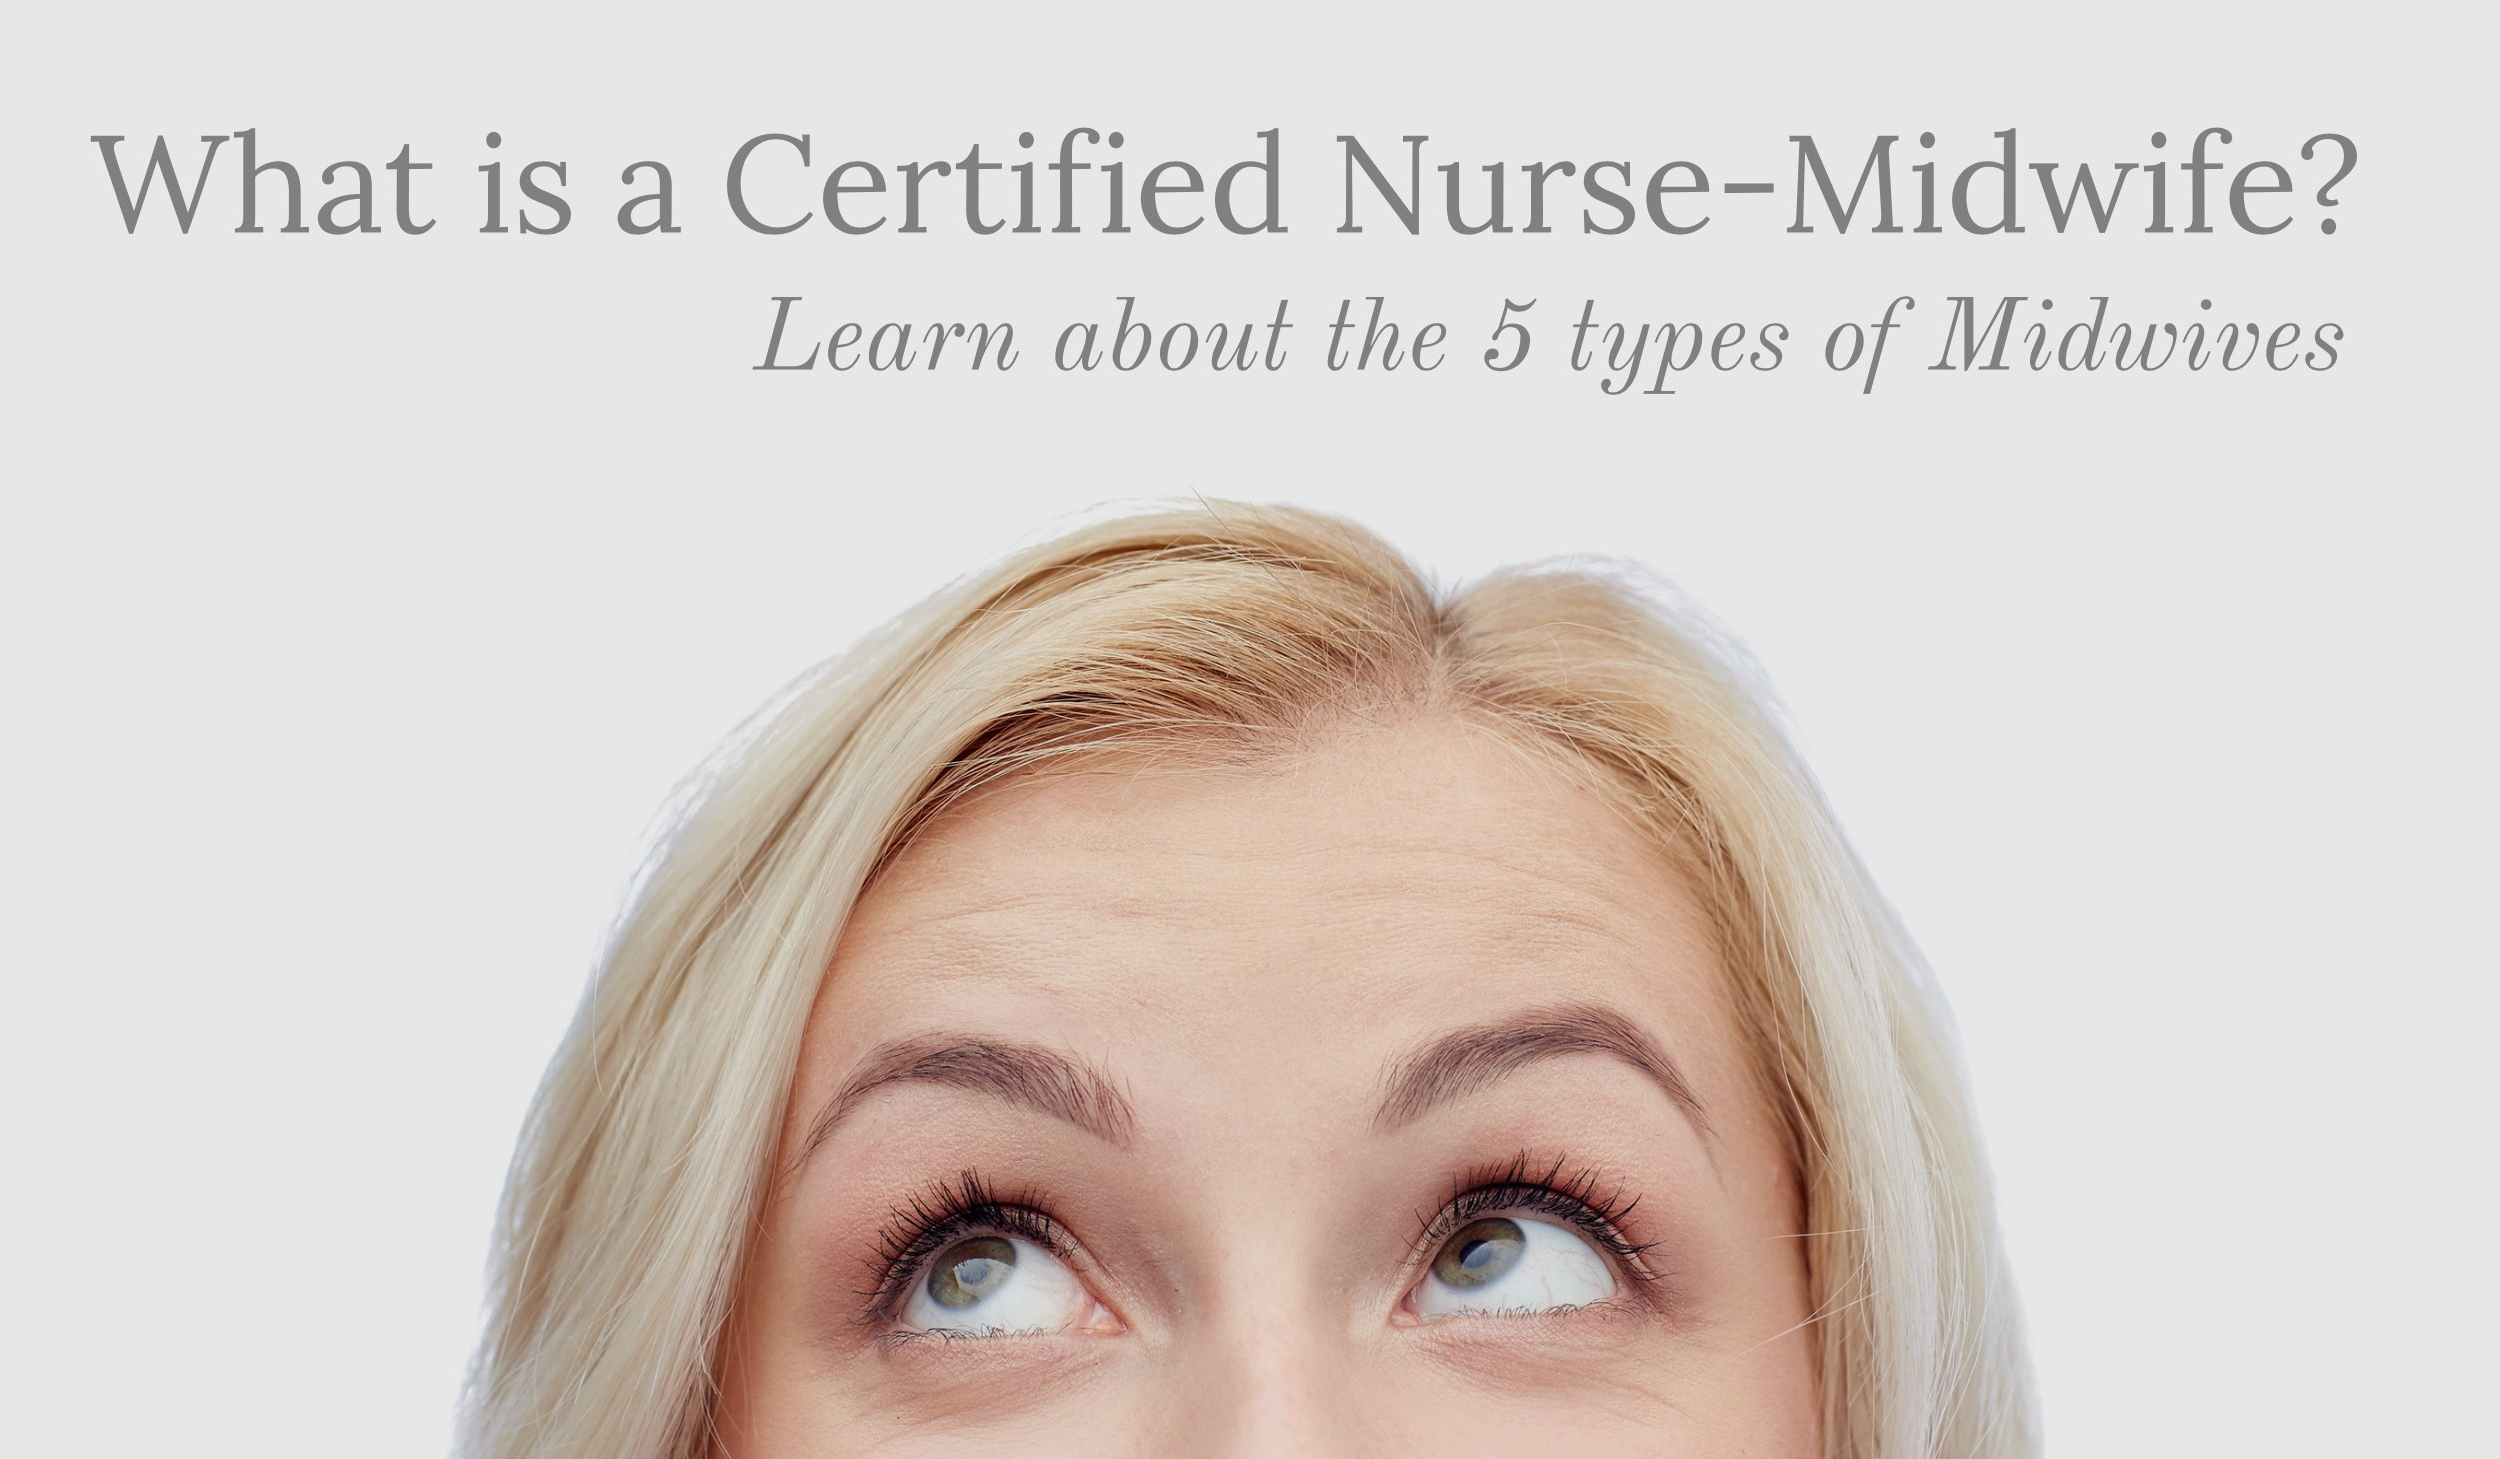 Blonde woman's face from the eye's up, looking up at text on ad about midwives